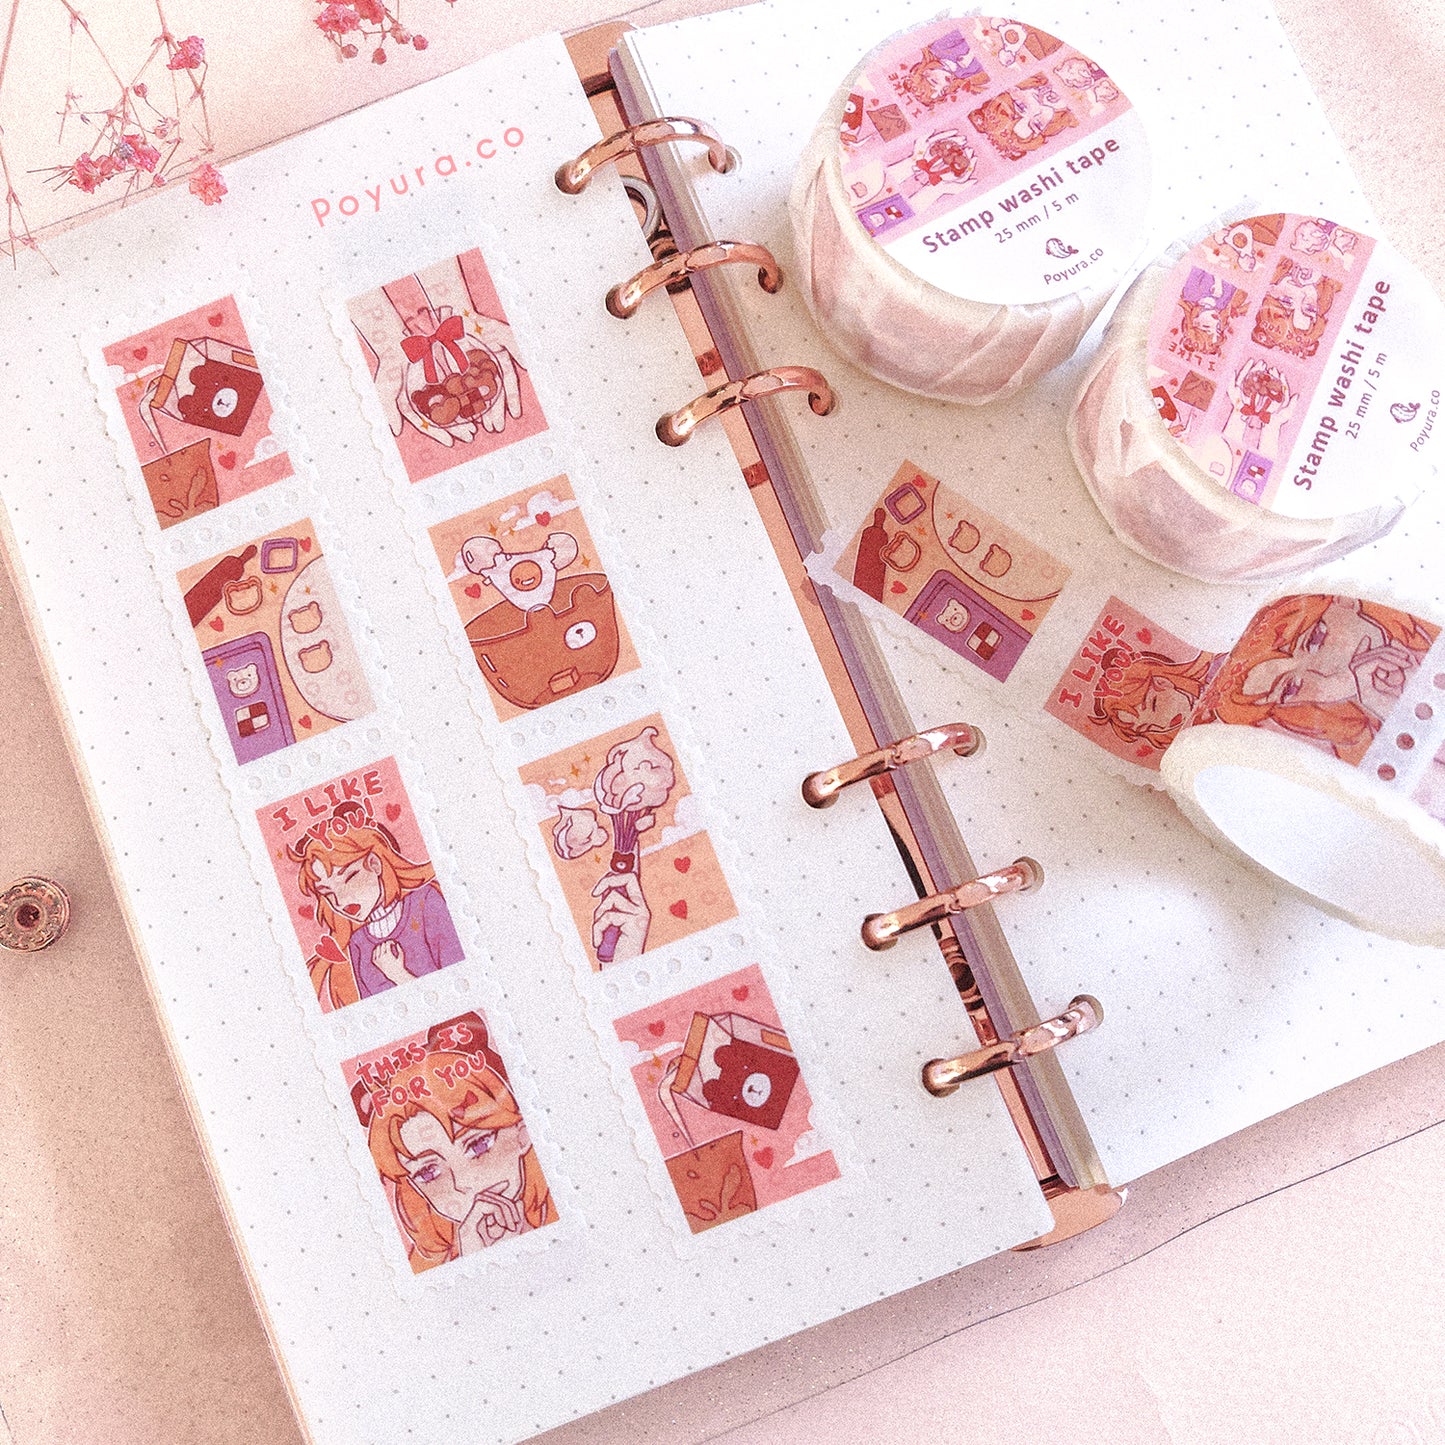 Valentine baking bear cafe food game console korean cake cereal breakfast tamagotchi gaming retro tech device deco tiny small orange food luck aesthetic cute polco kpop journal toploader sticker sheet stamp washi tape